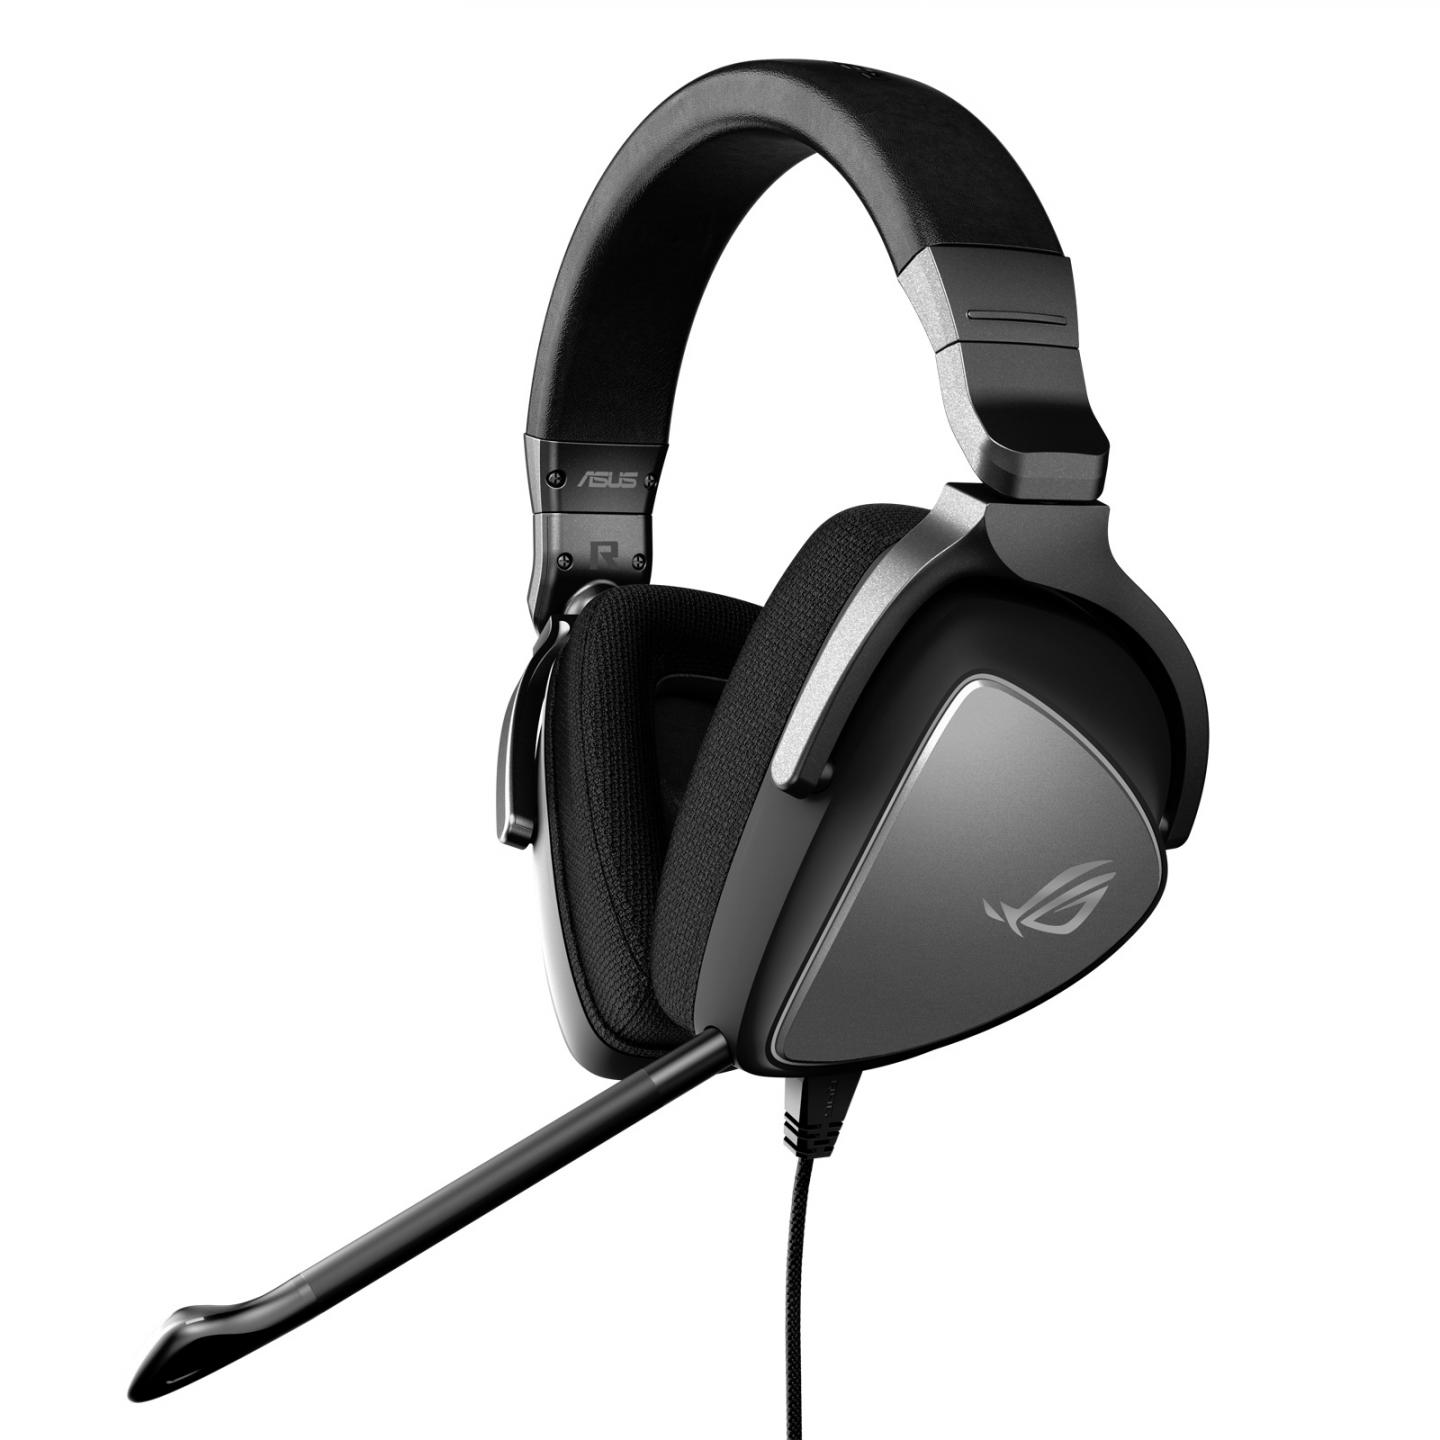 Rog-delta-core-gaming-headset-1